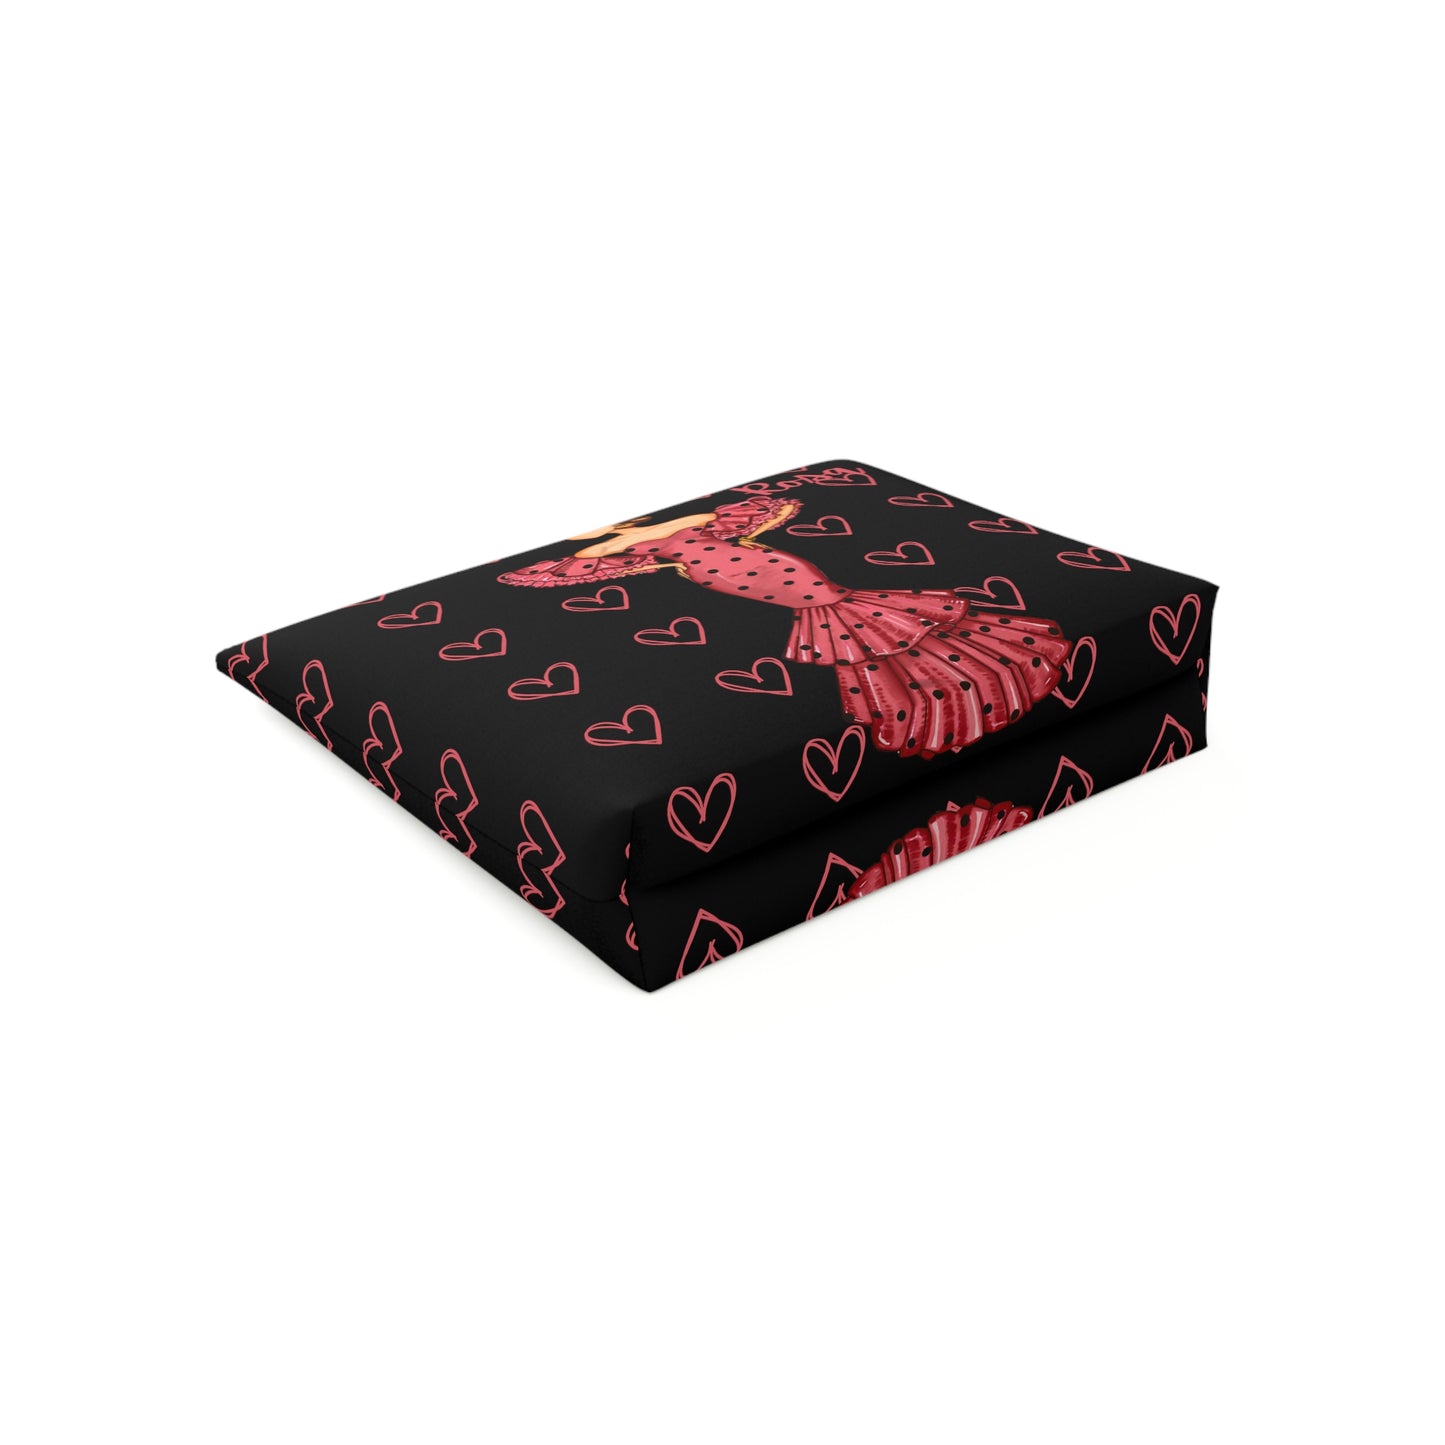 a black and red box with hearts on it